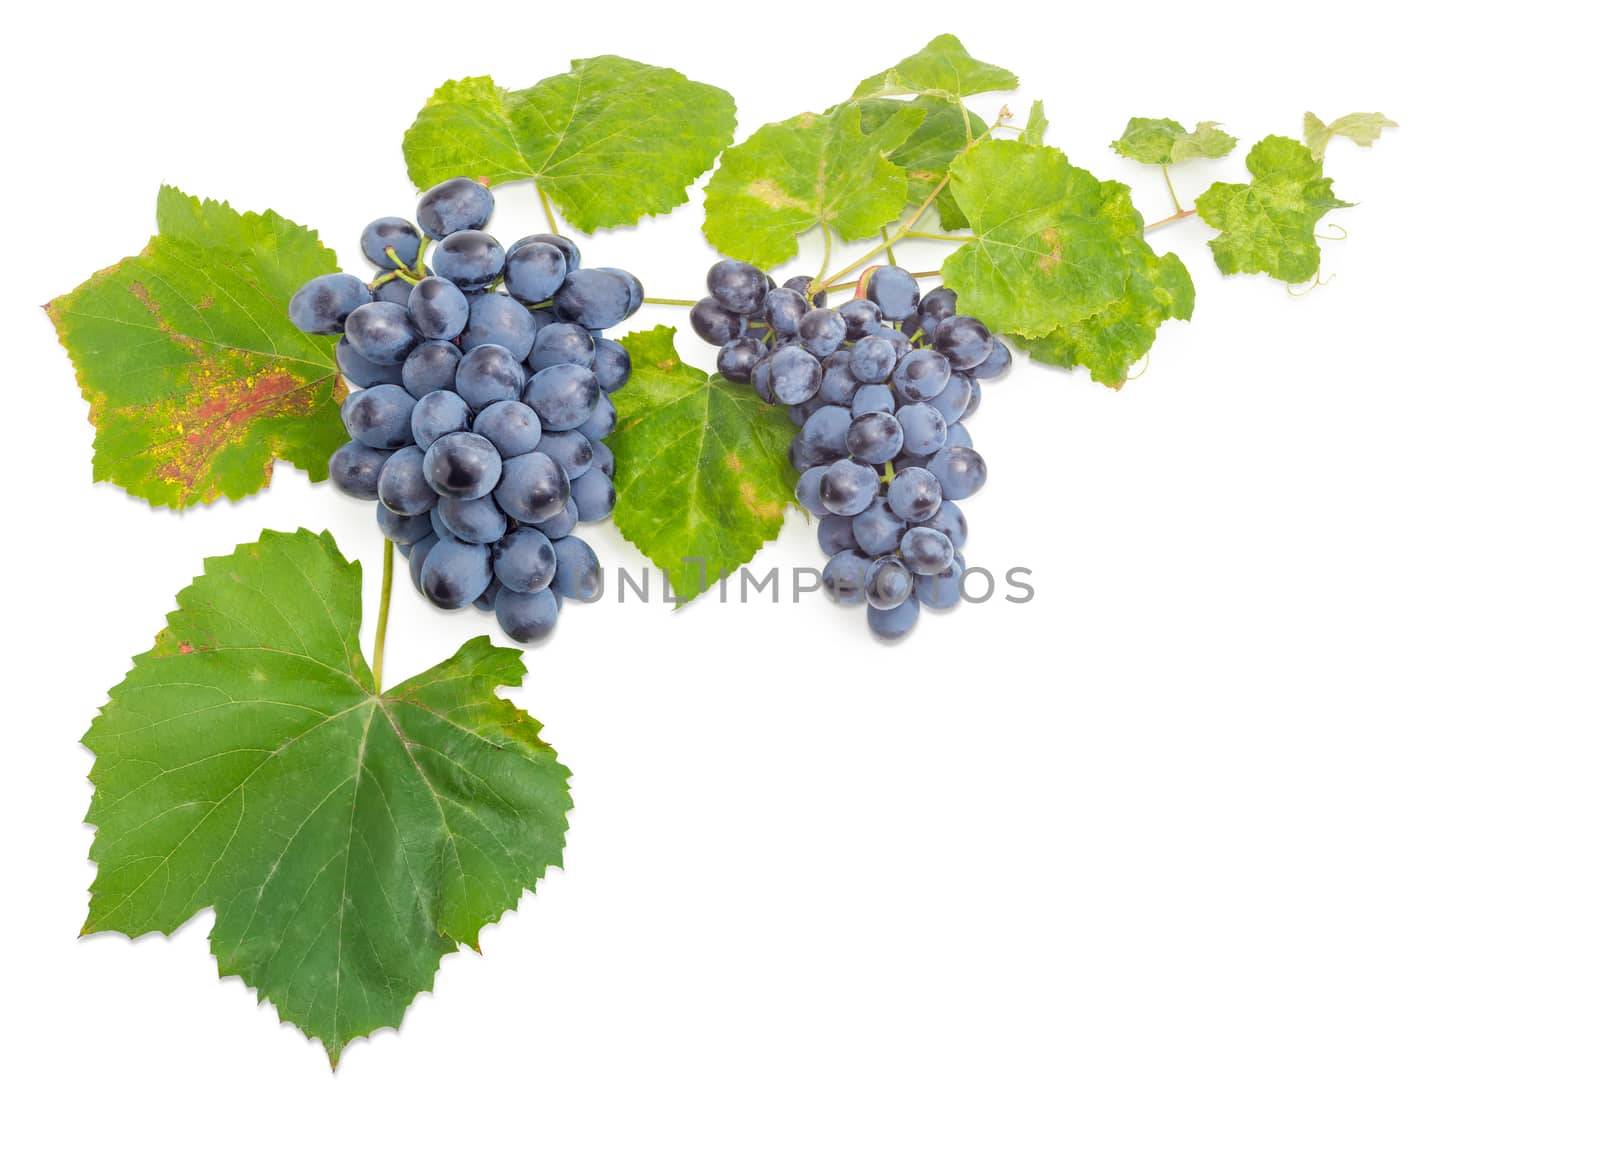 Clusters of blue grapes on the vine with leaves by anmbph